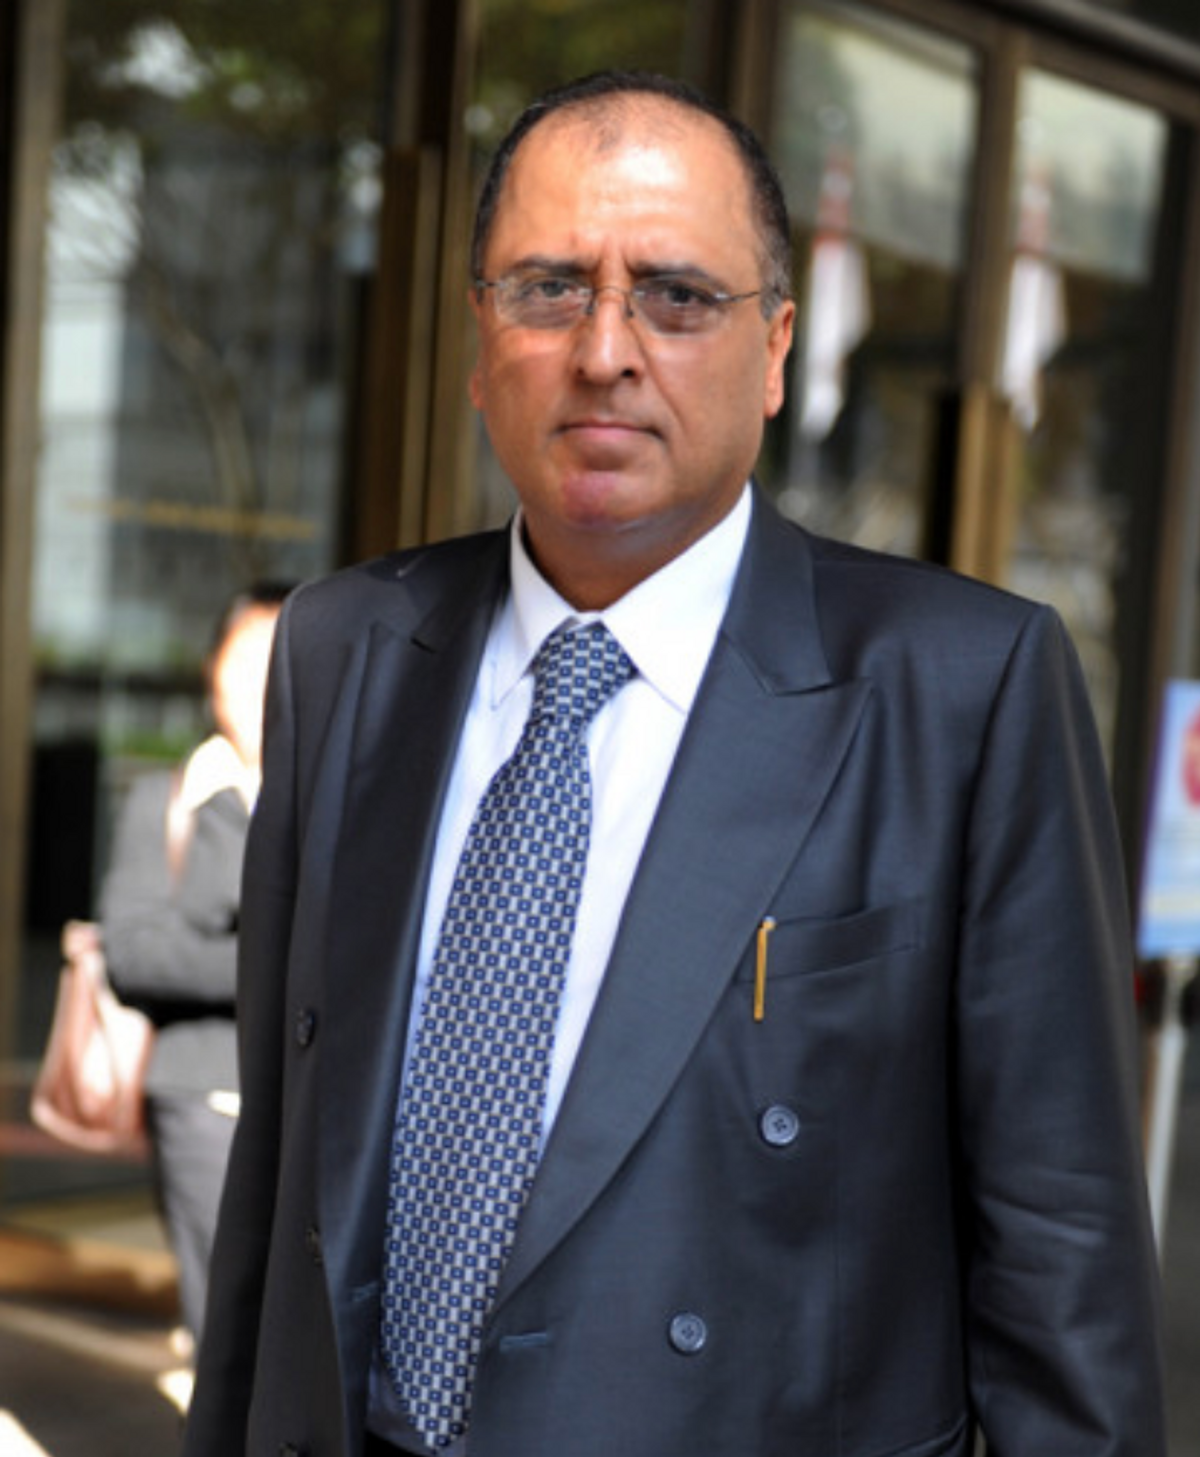 Subhash Kapoor has received a 10-year prison sentence from a court in Tamil Nadu. Photo: Alamy